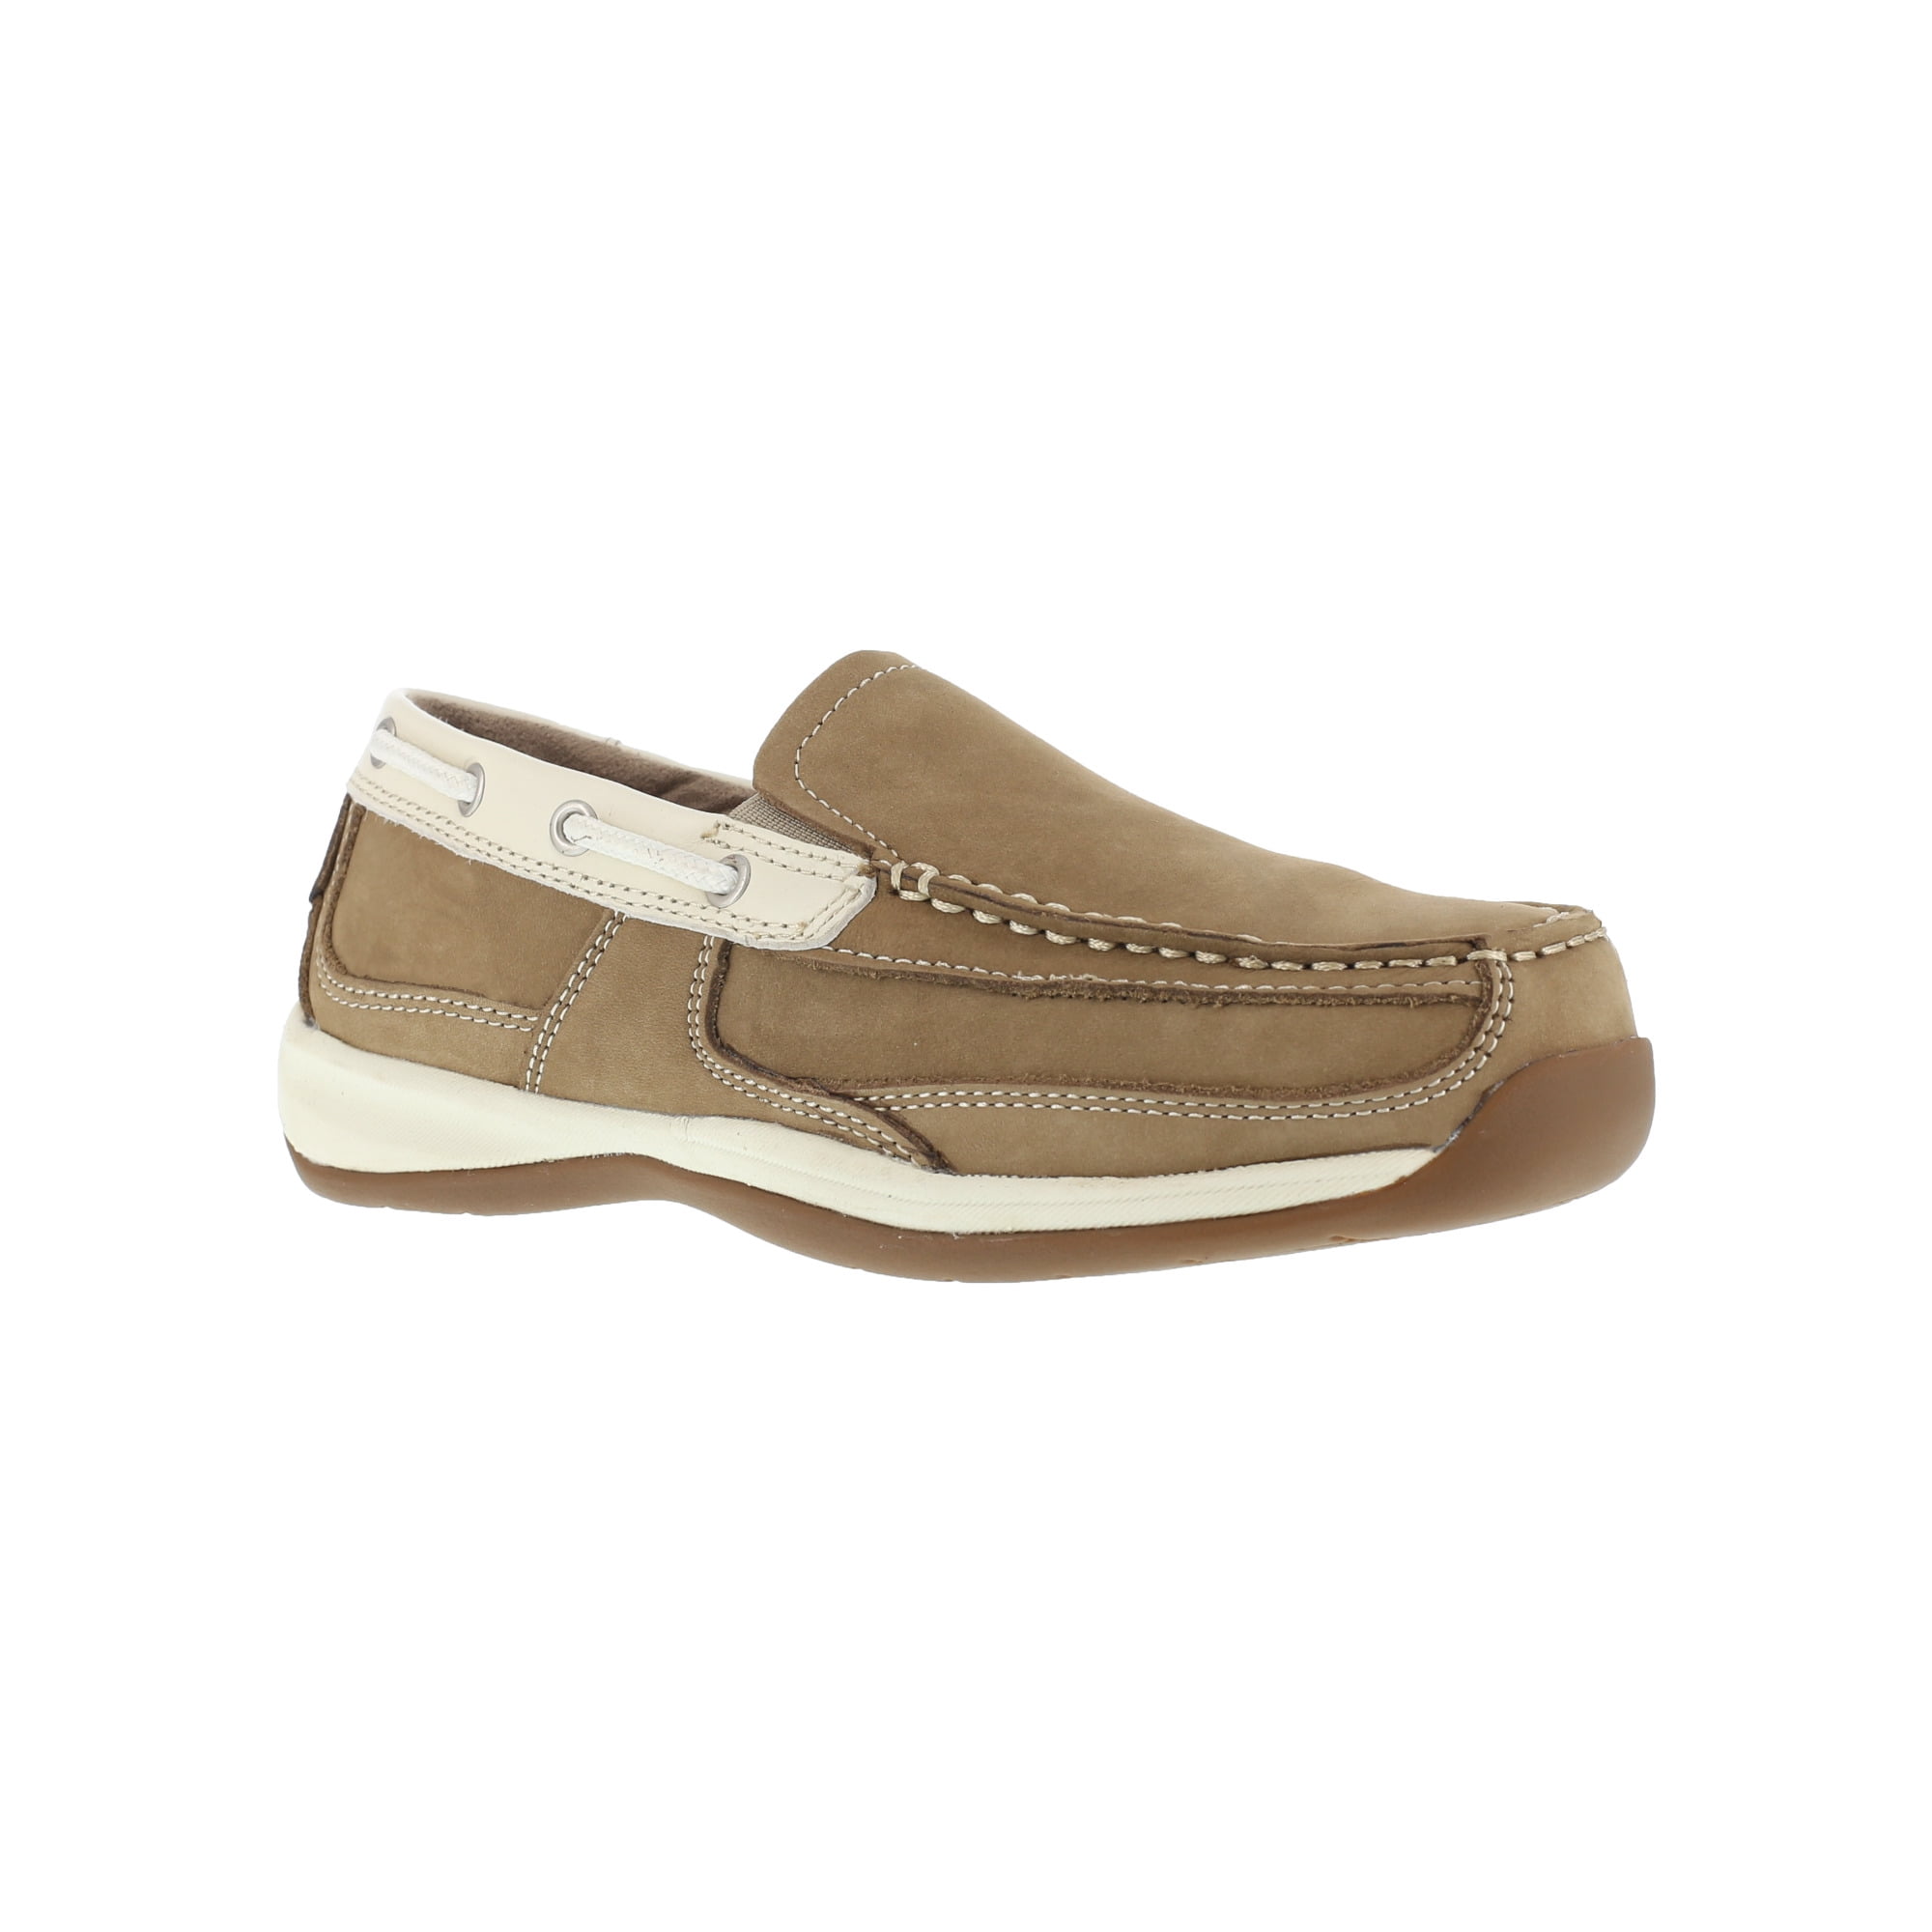 rockport boat shoes womens